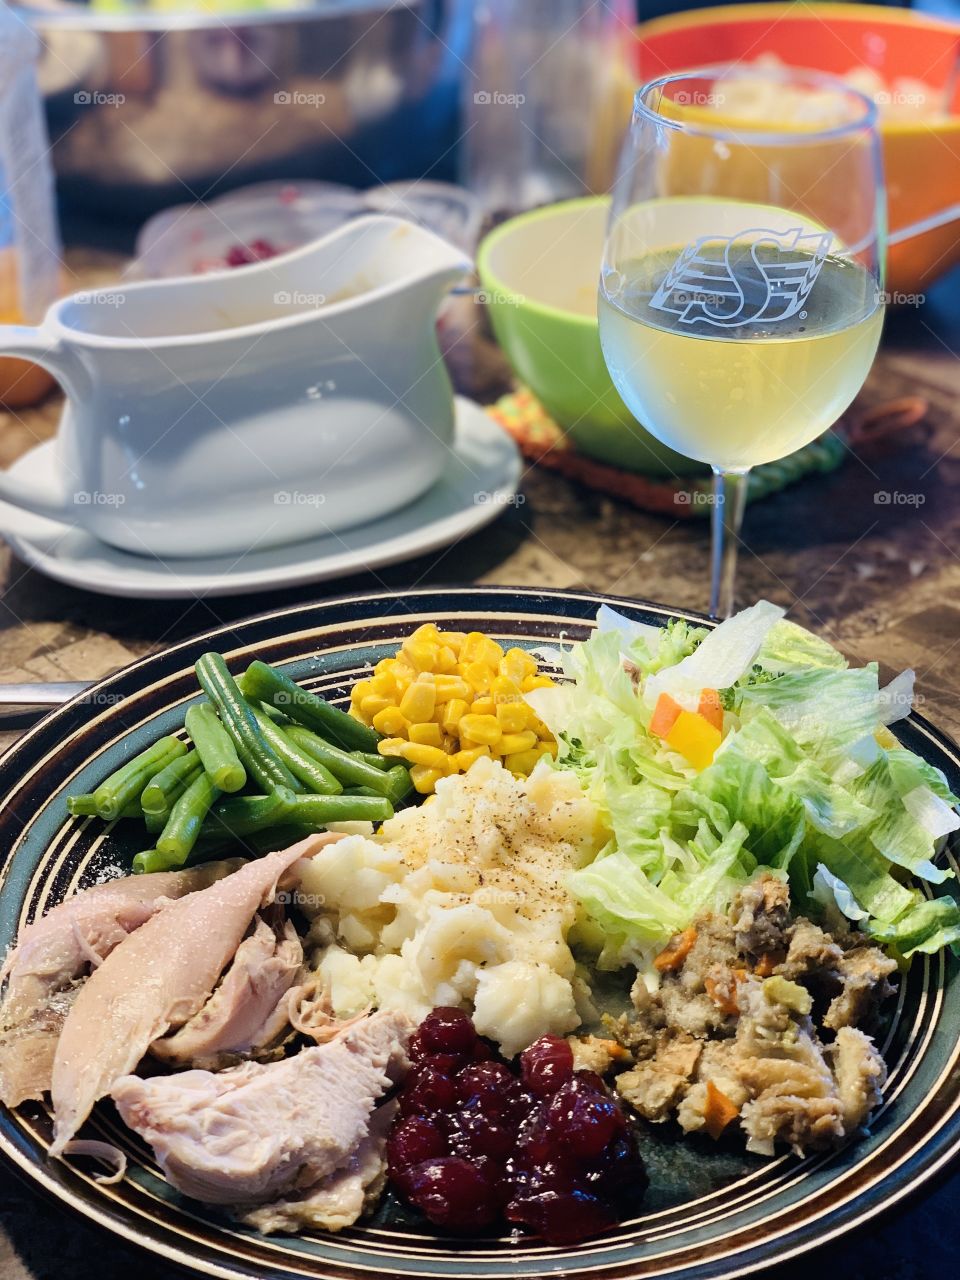 Thanksgiving meal 